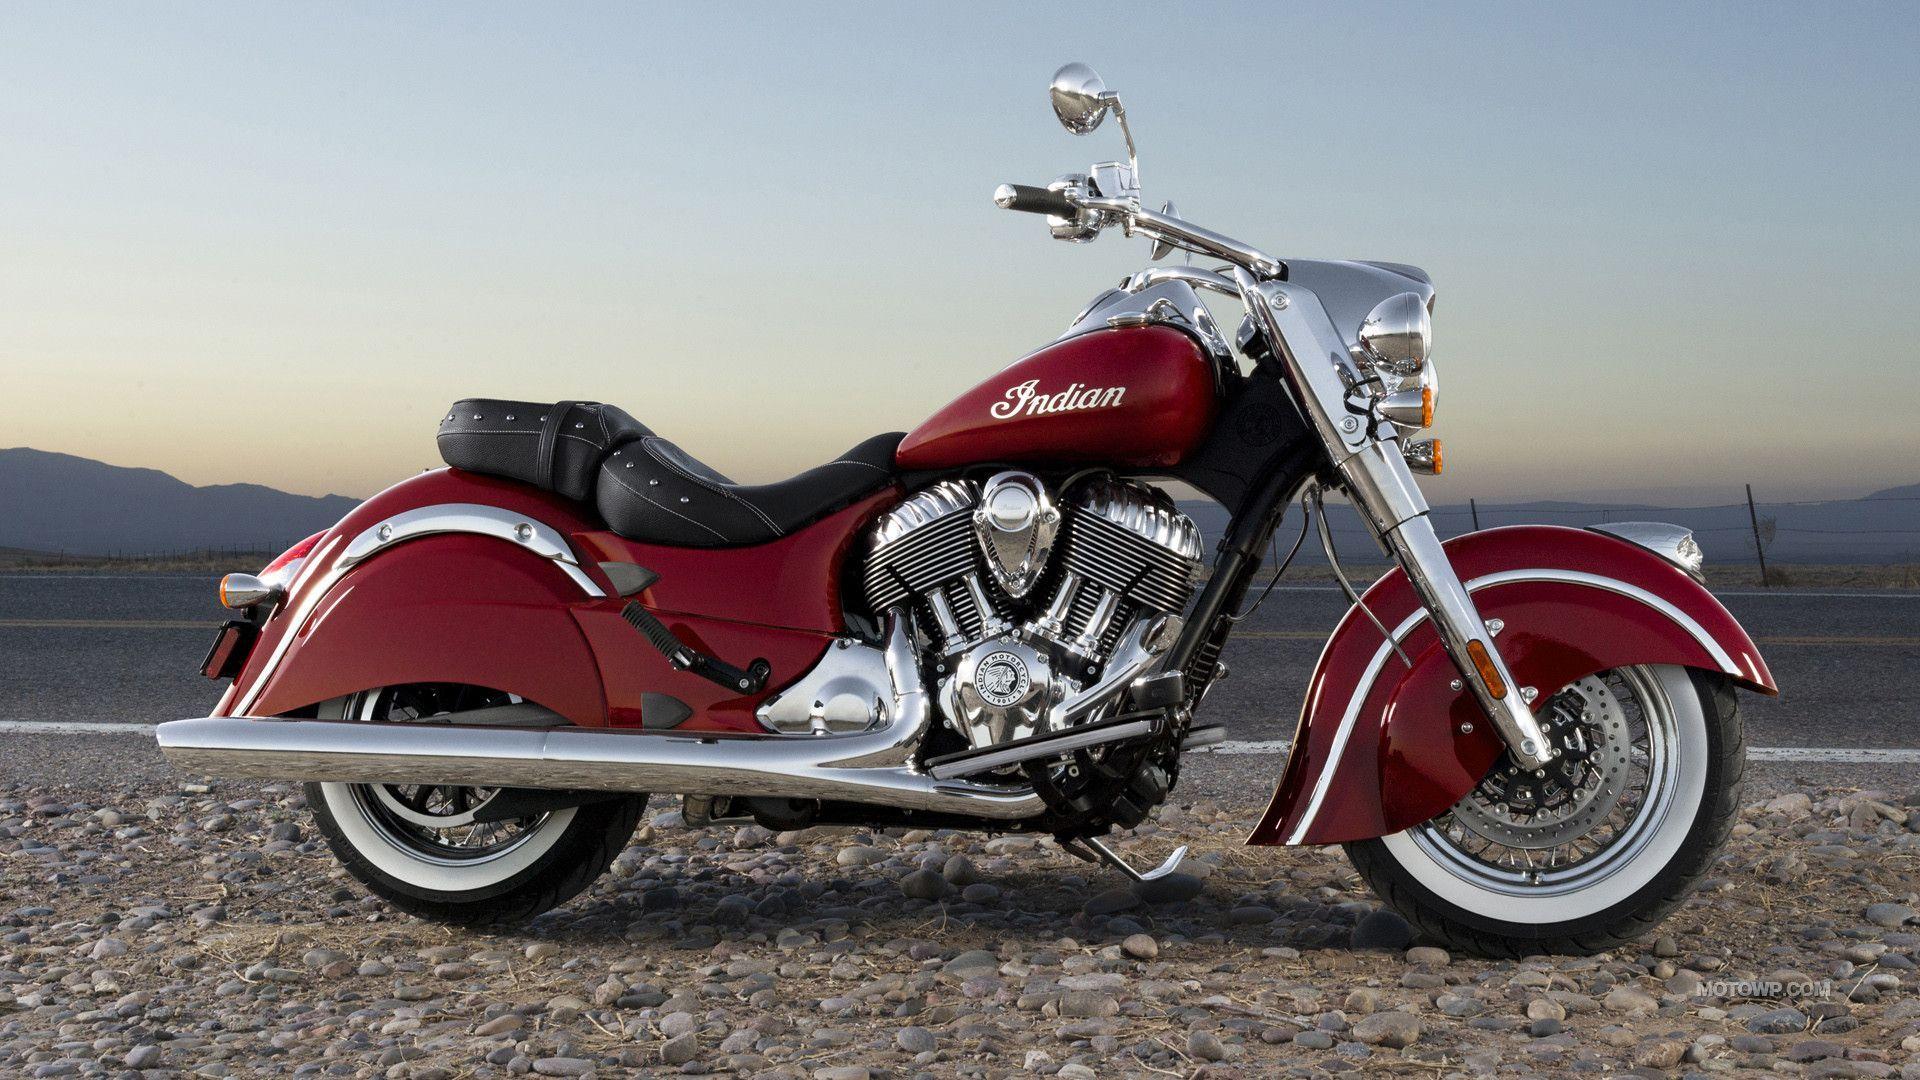 2014 Indian Motorcycle Wallpapers Hd Backgrounds 8 HD Wallpapers